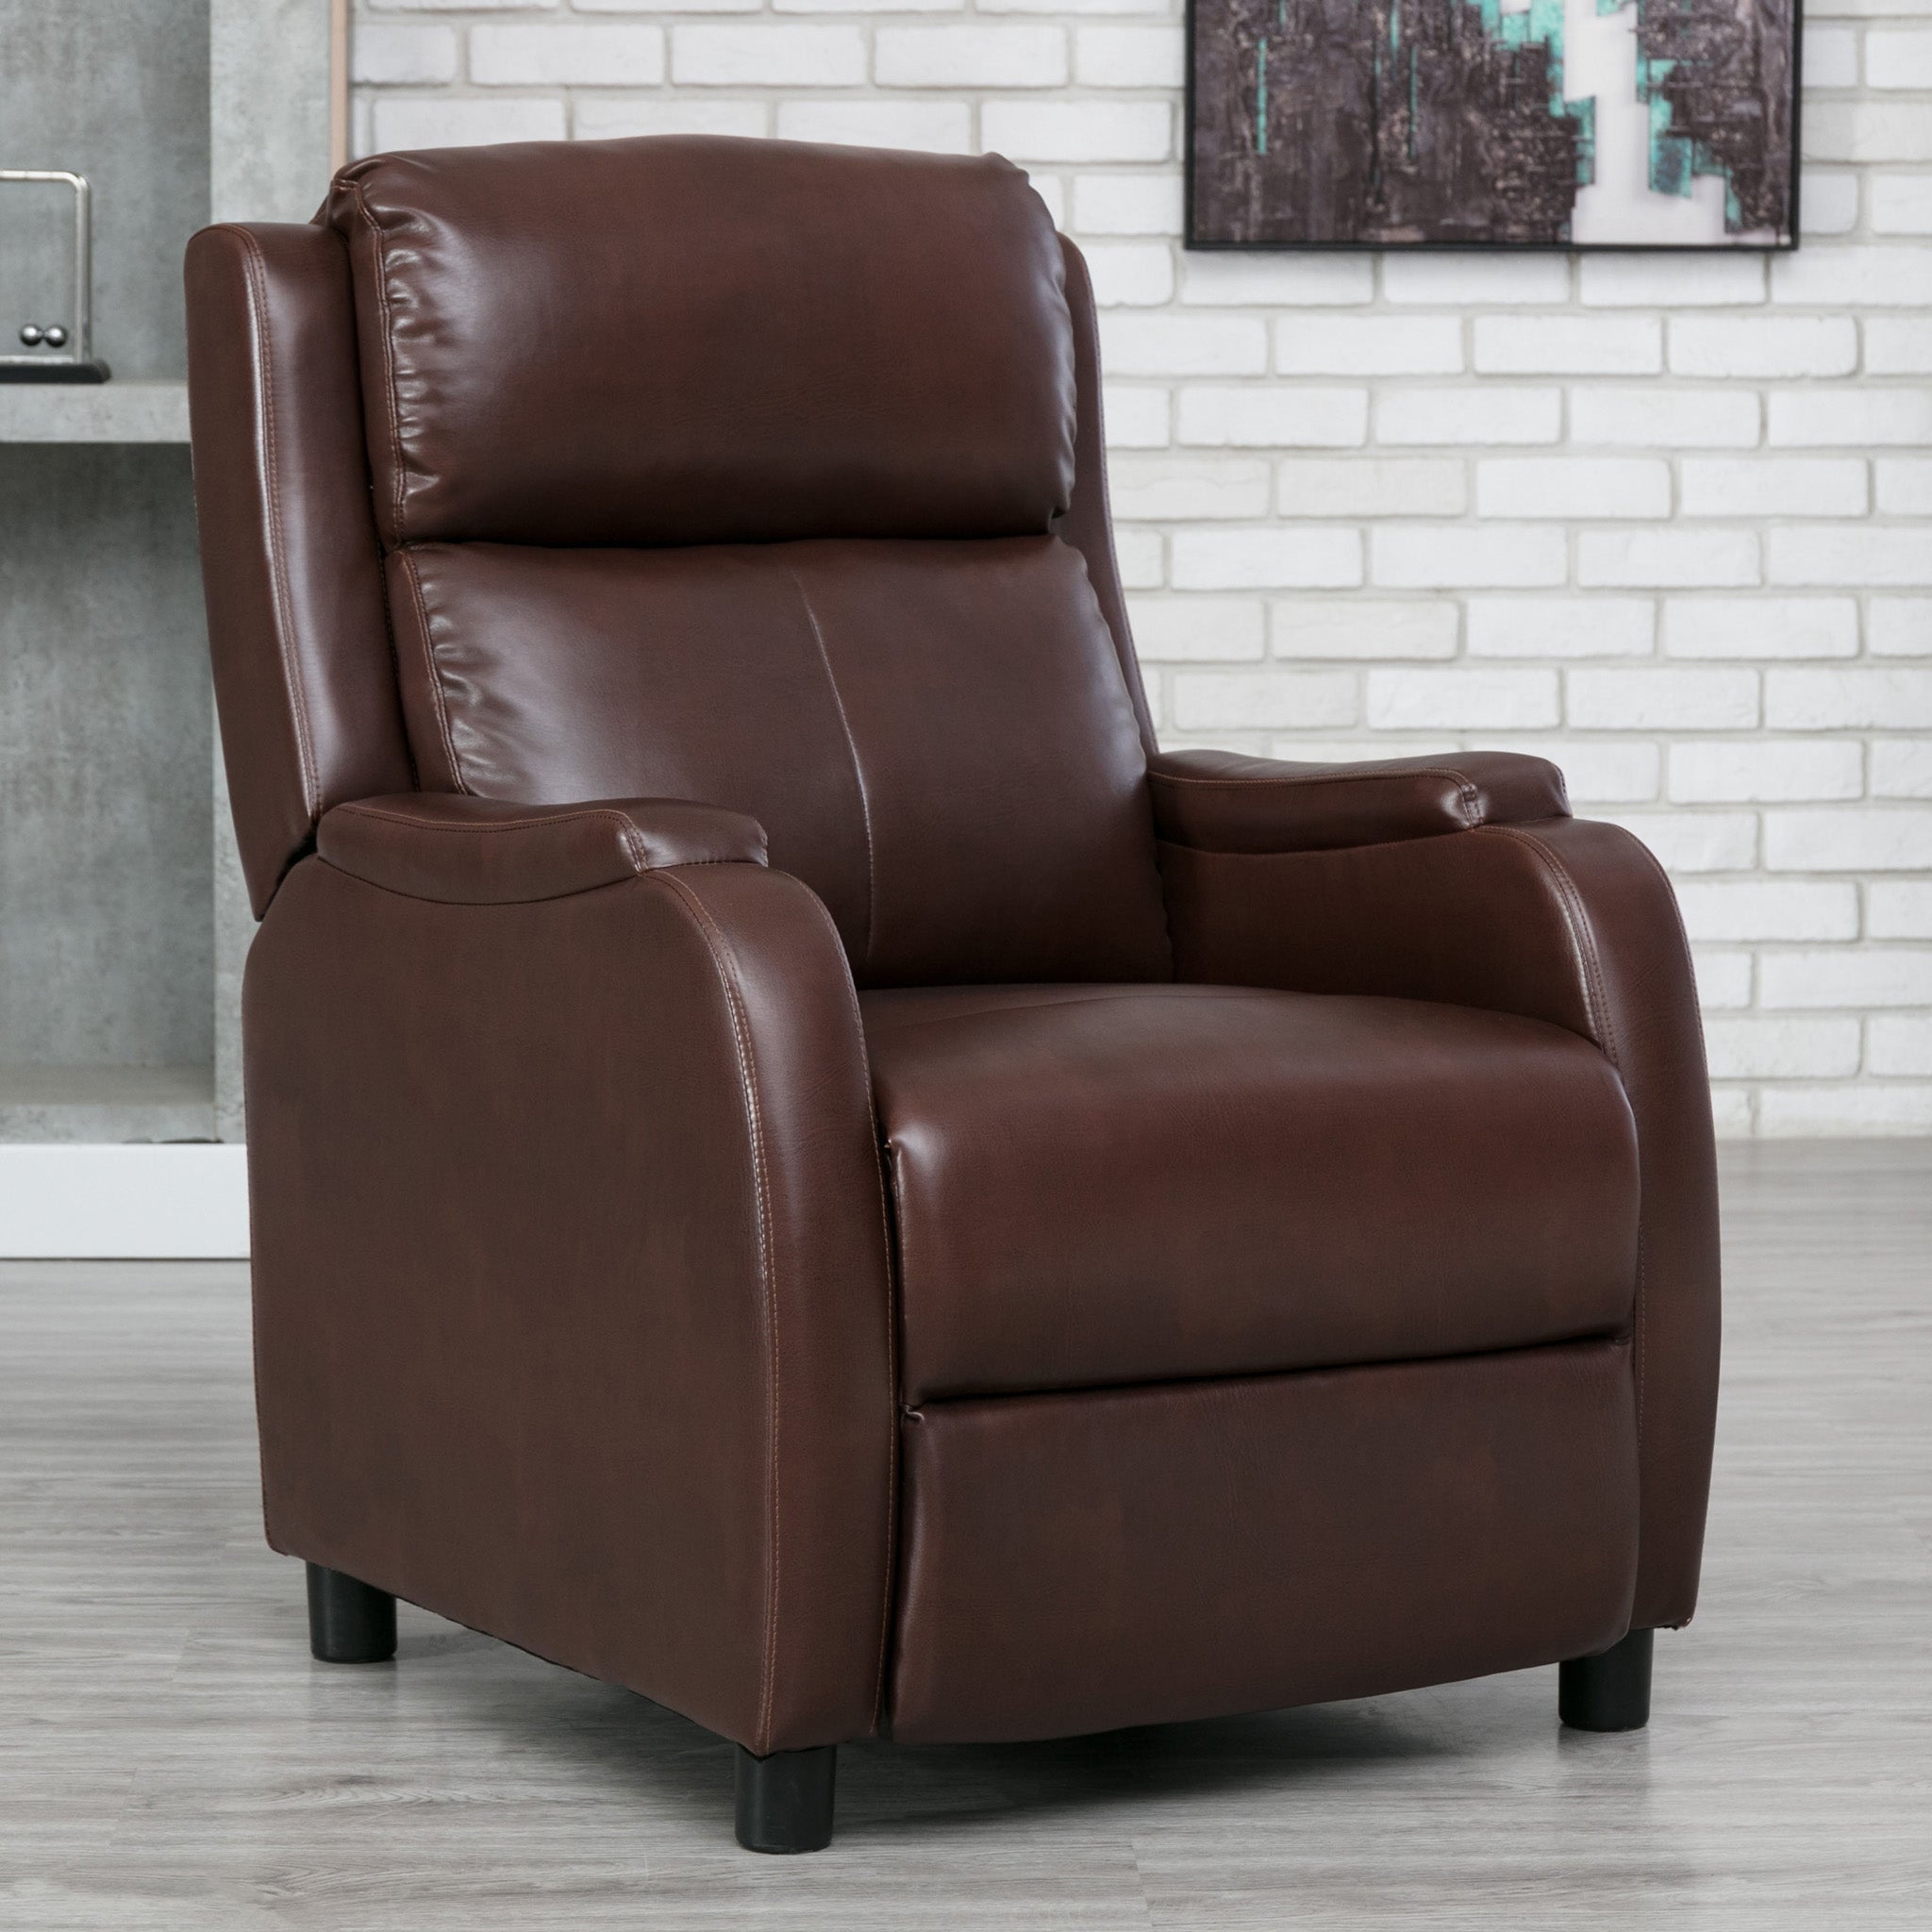  Our Latest Small Recliner: The Churwell Leather Push Back 